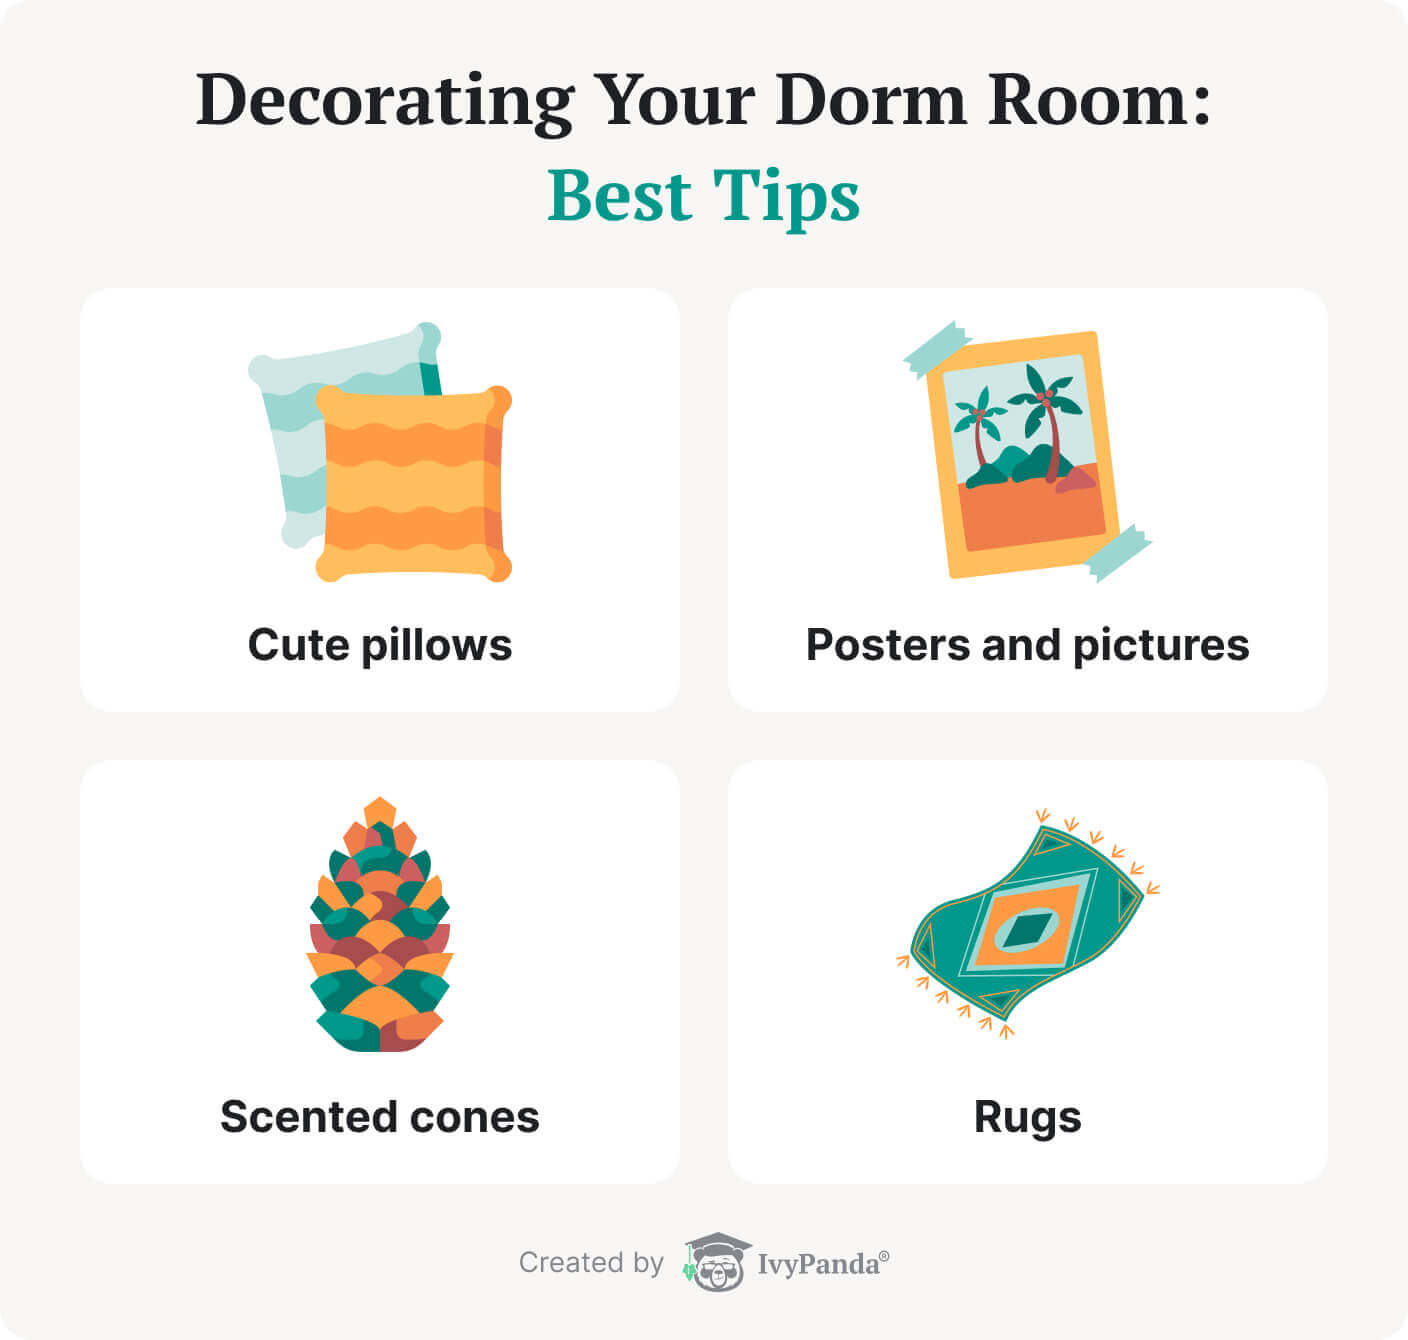 The picture enumerates some of the best college dorm room decorating ideas.